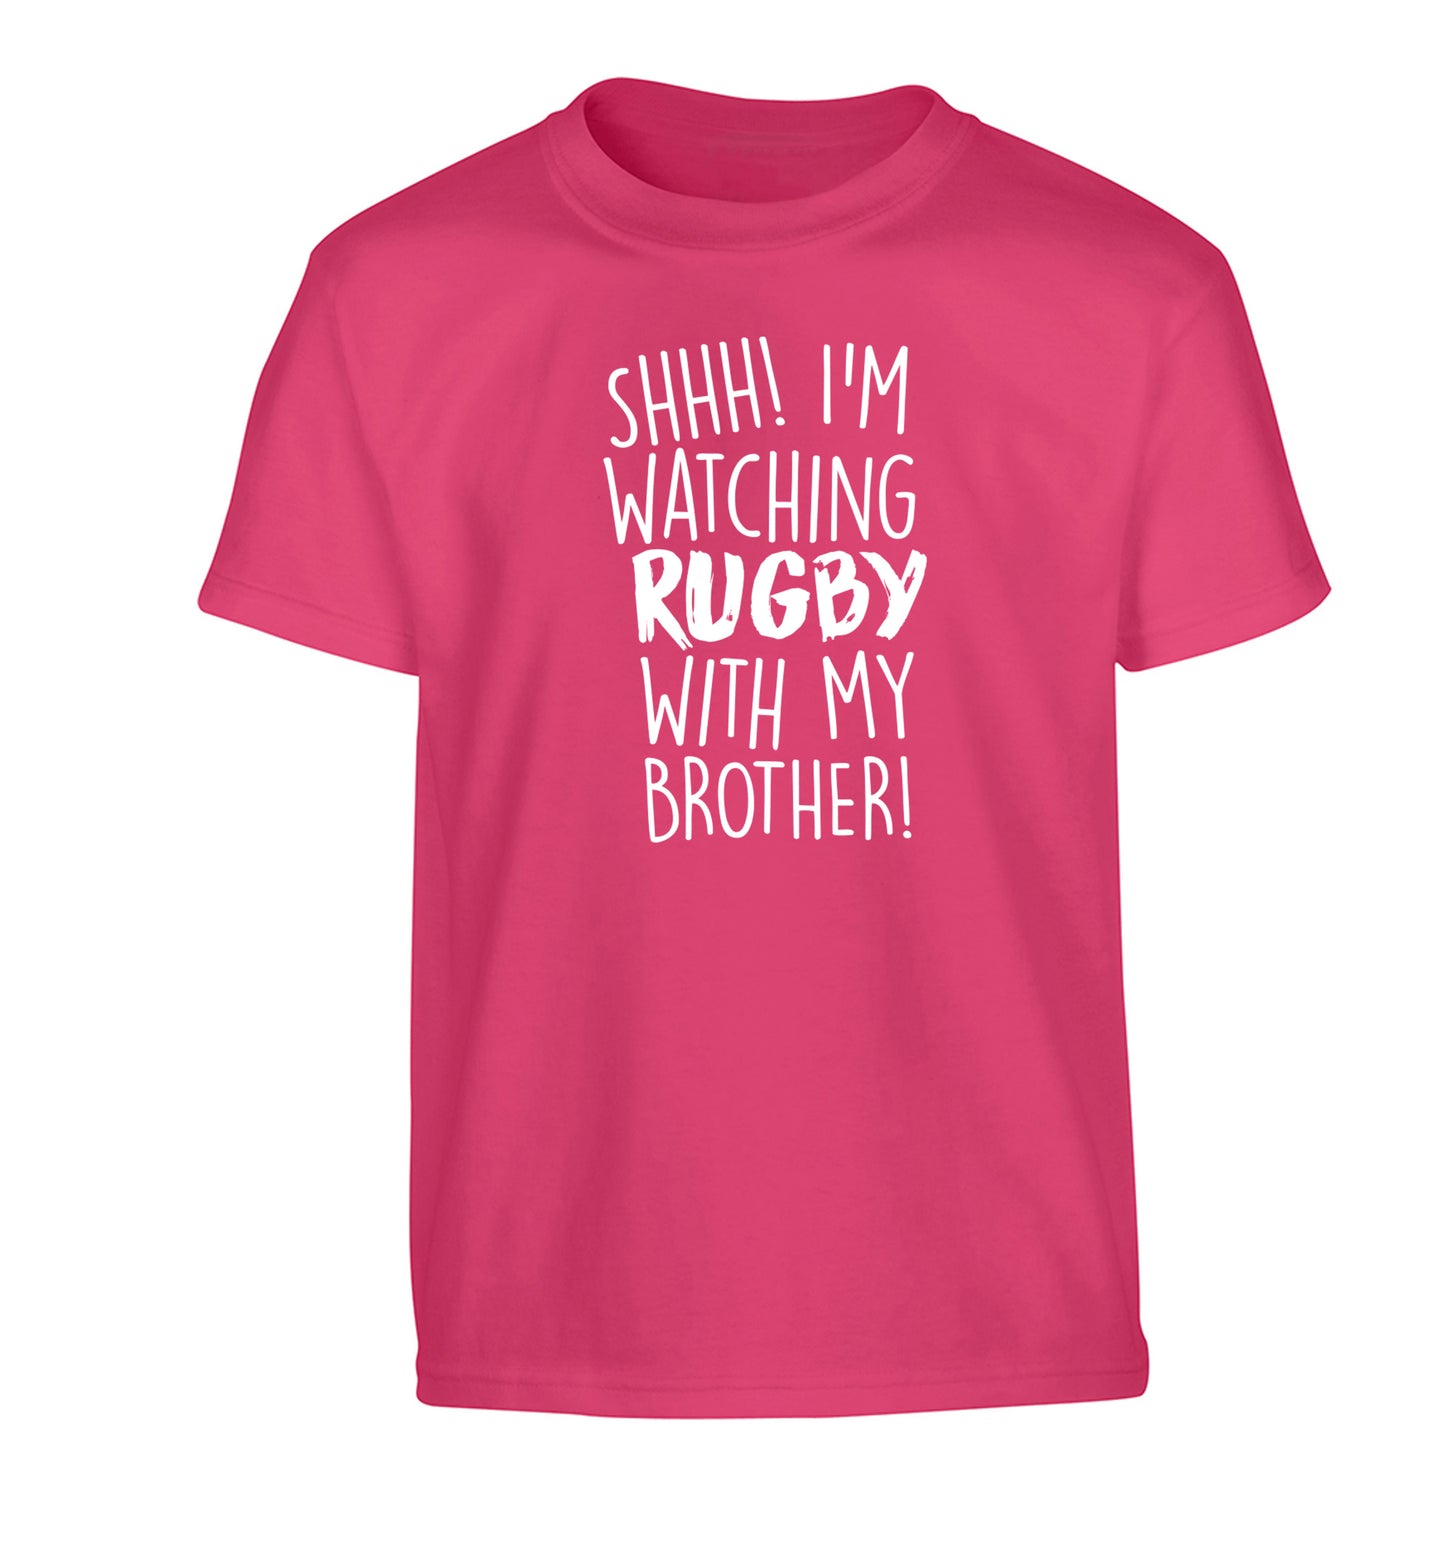 Shh... I'm watching rugby with my brother Children's pink Tshirt 12-13 Years